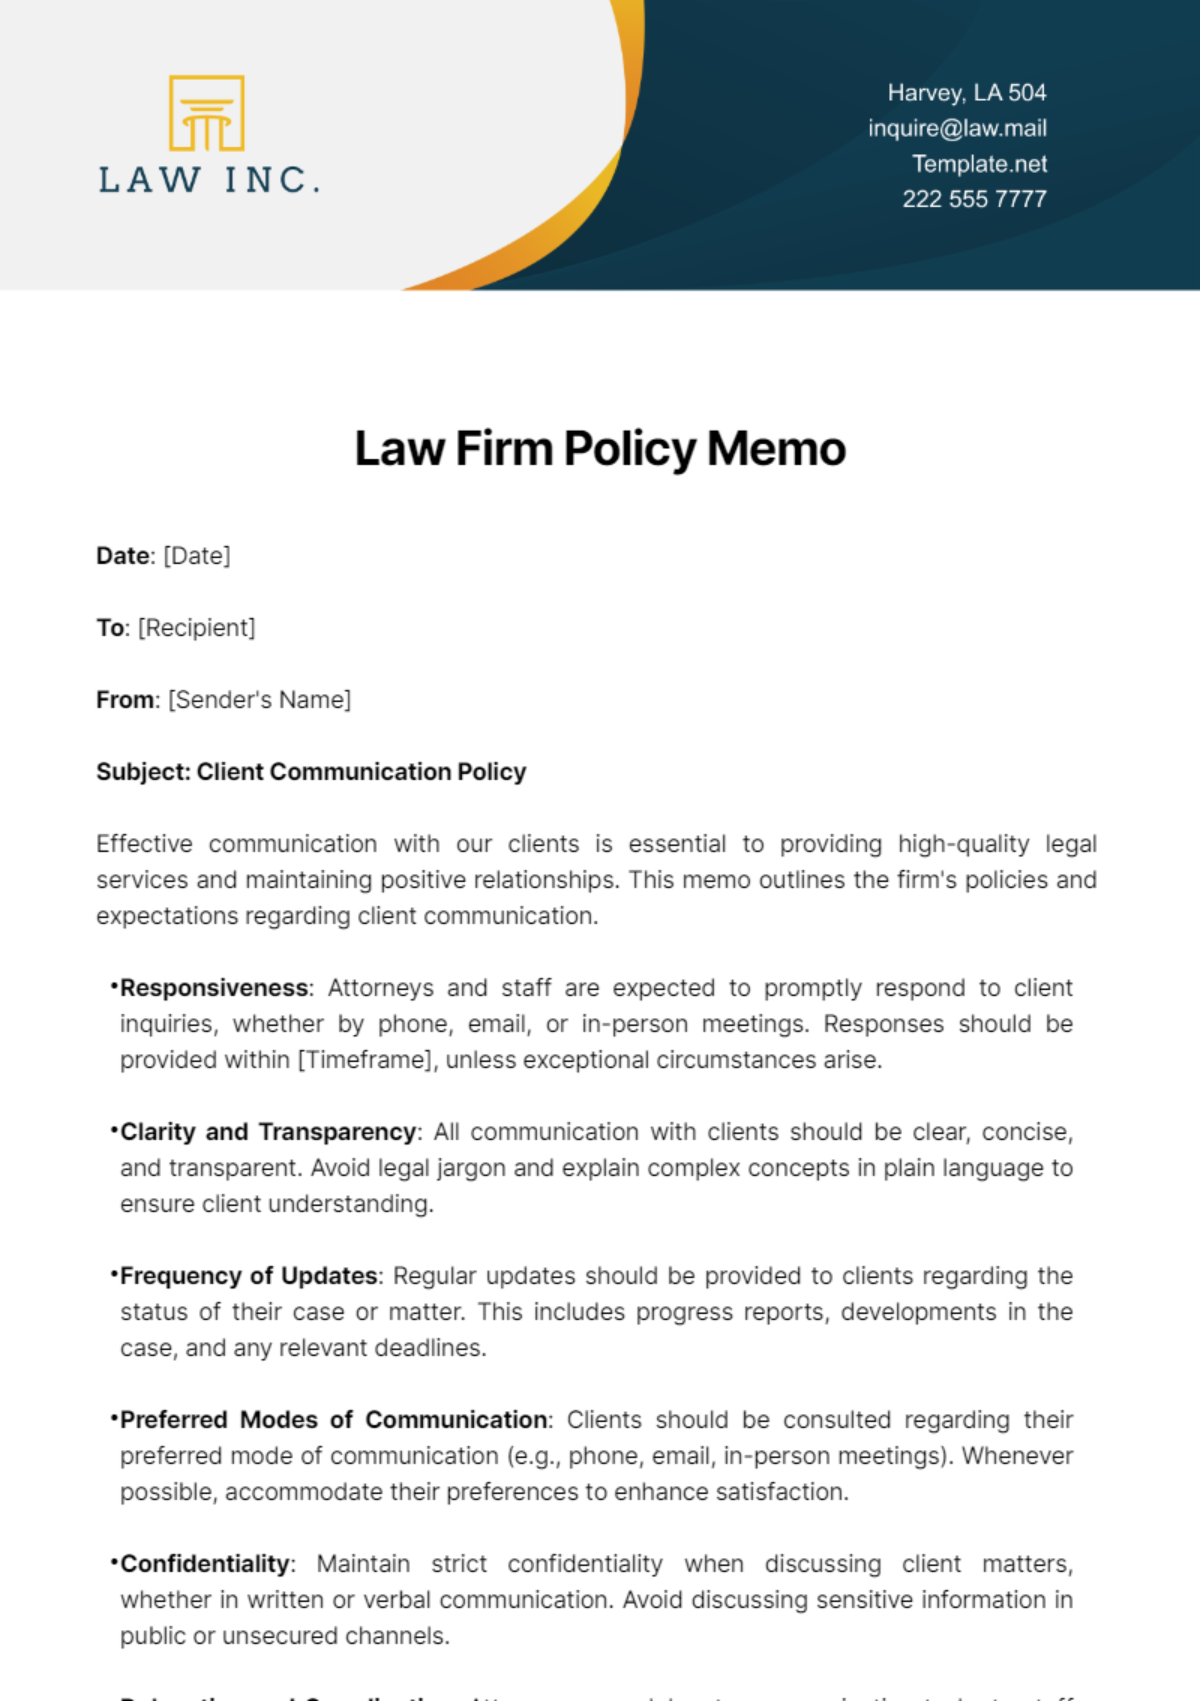 Law Firm Policy Memo Template